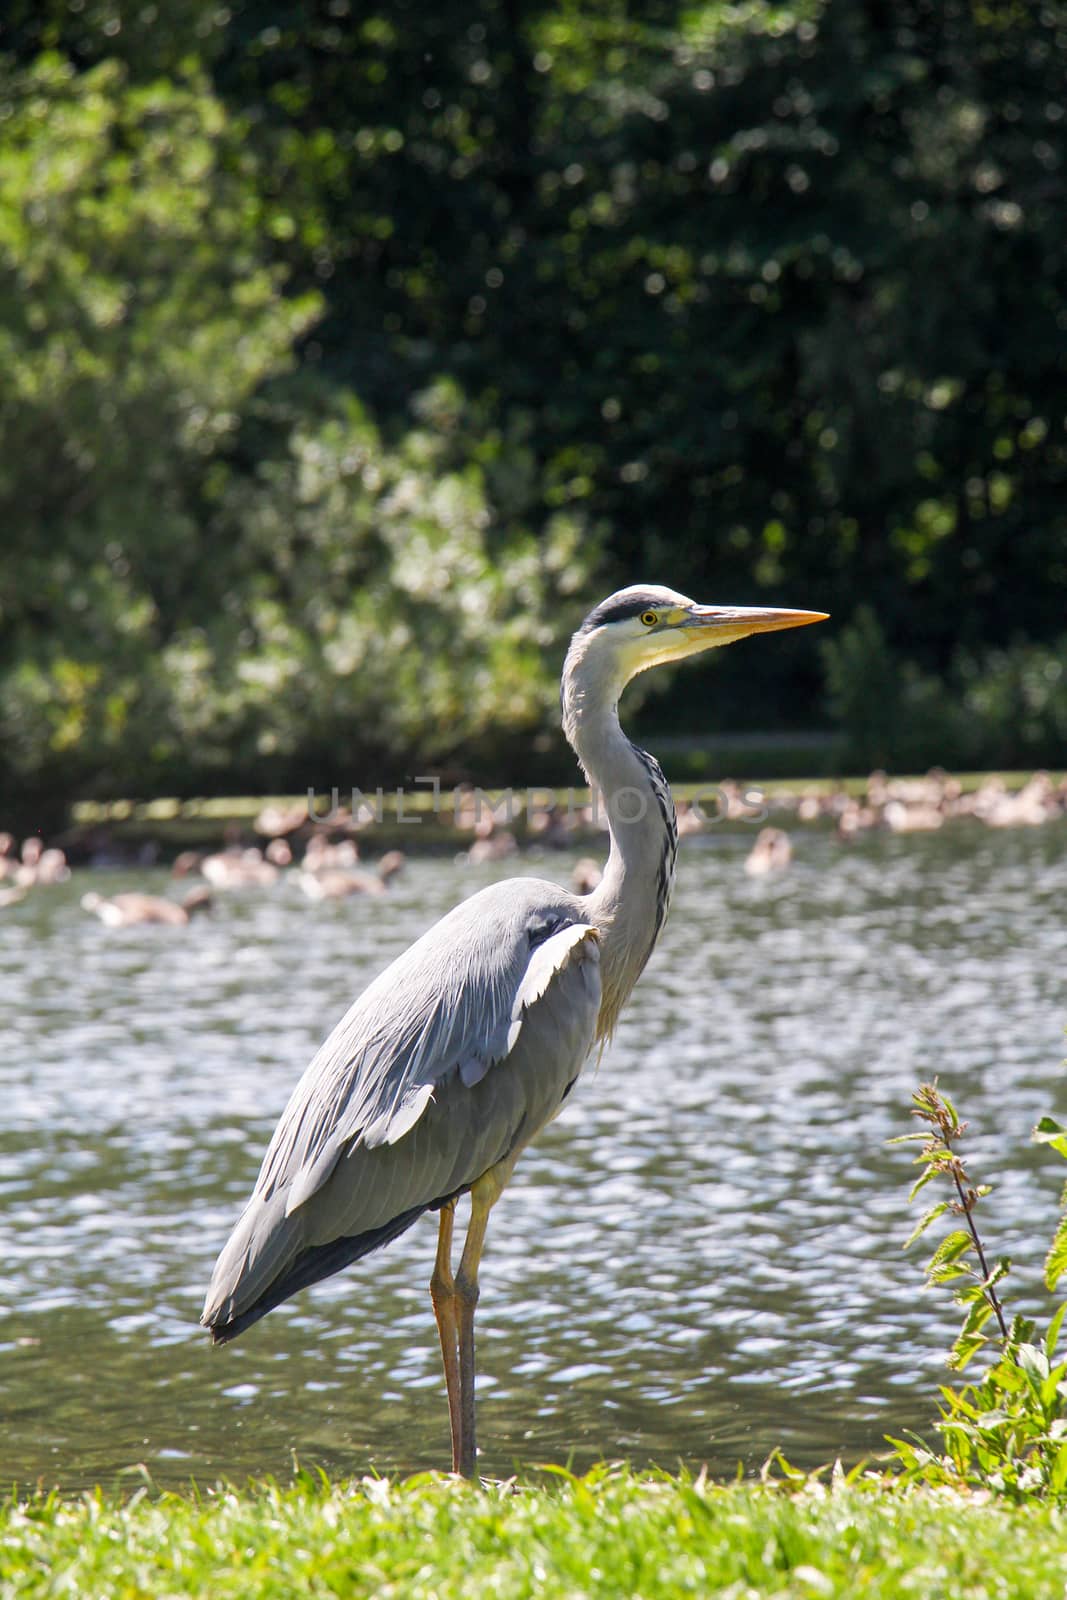 Grey heron standing in front of lake with geese surrounded by plants.